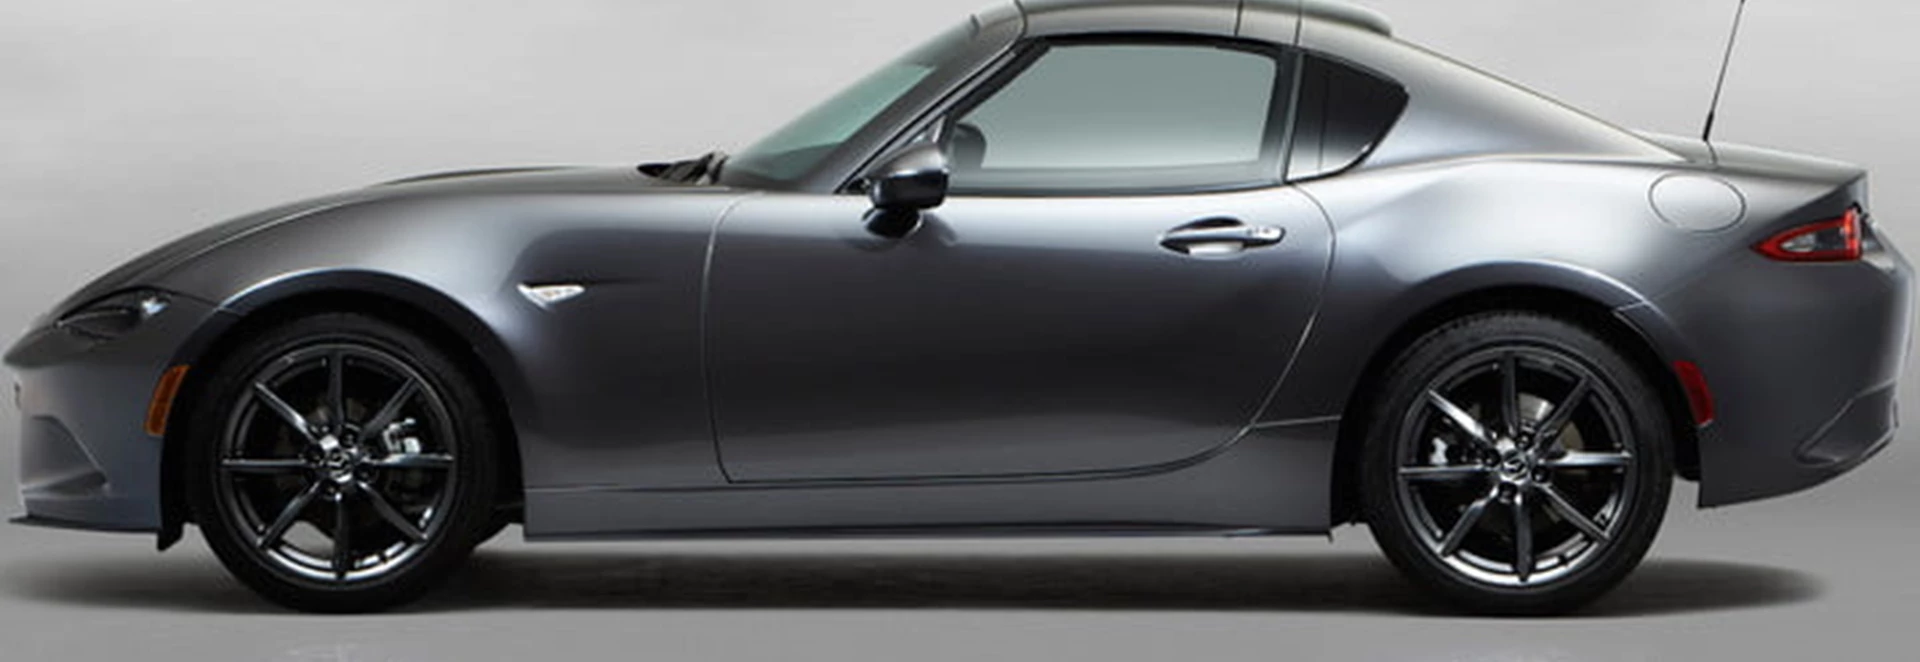 Mazda MX-5 hardtop expected to appear in New York